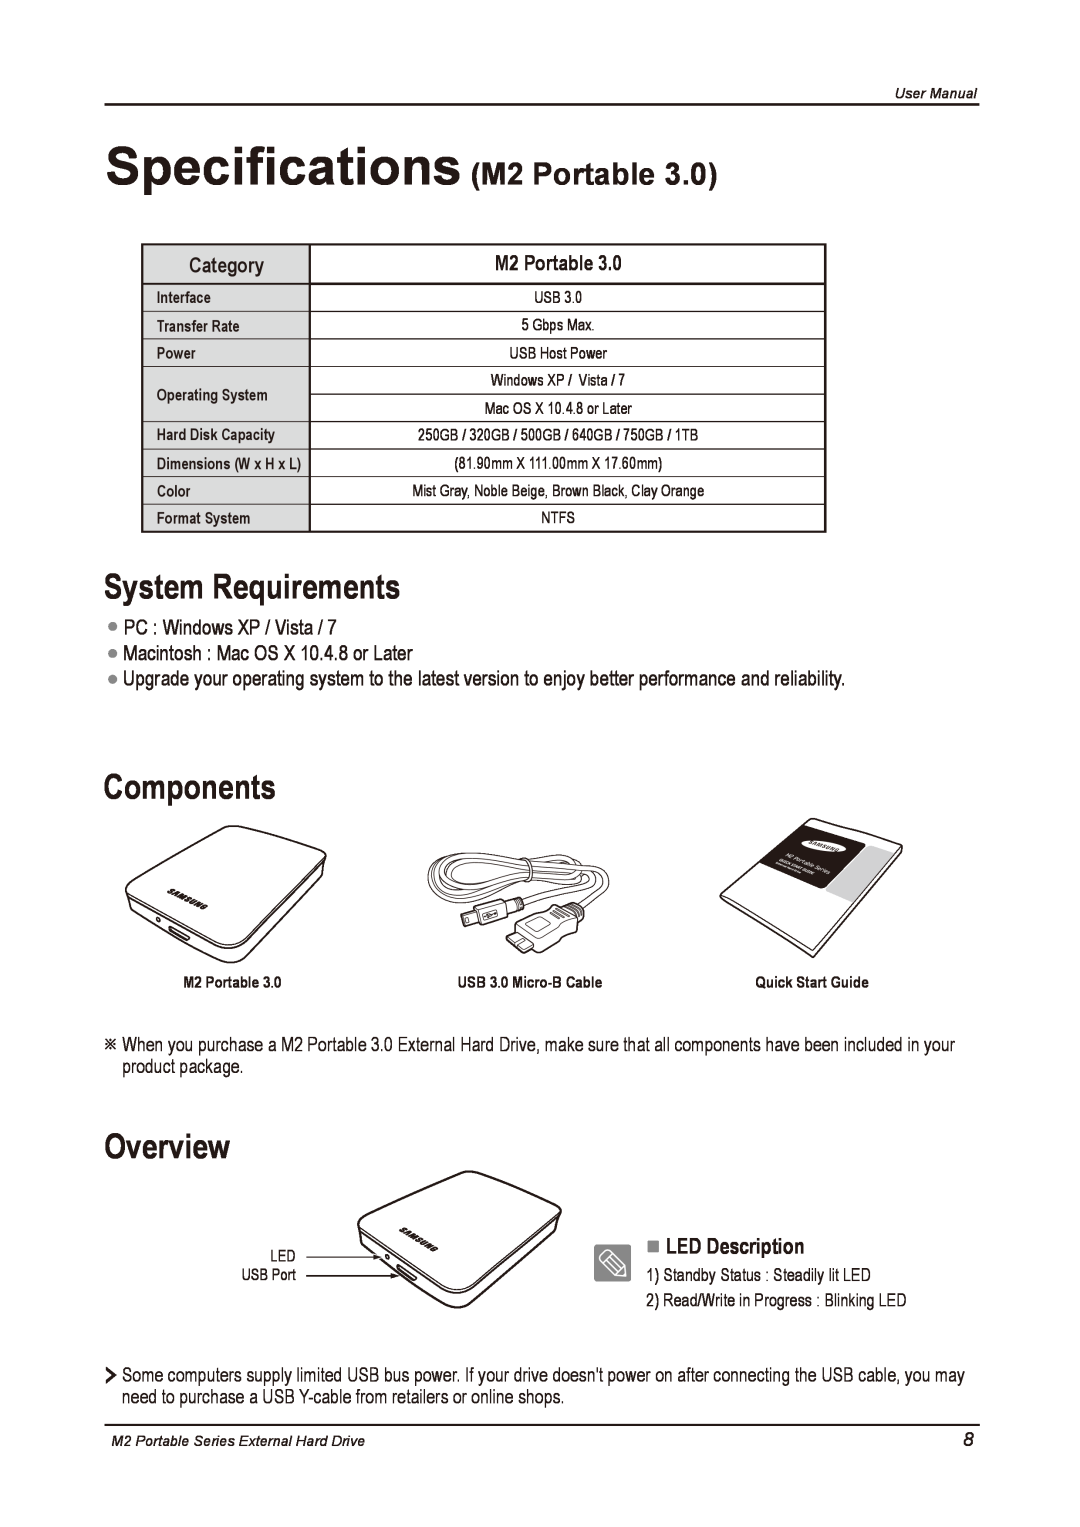 Samsung HX-M750UAB System Requirements, Components, Overview, Specifications M2 Portable, Category, LED Description 